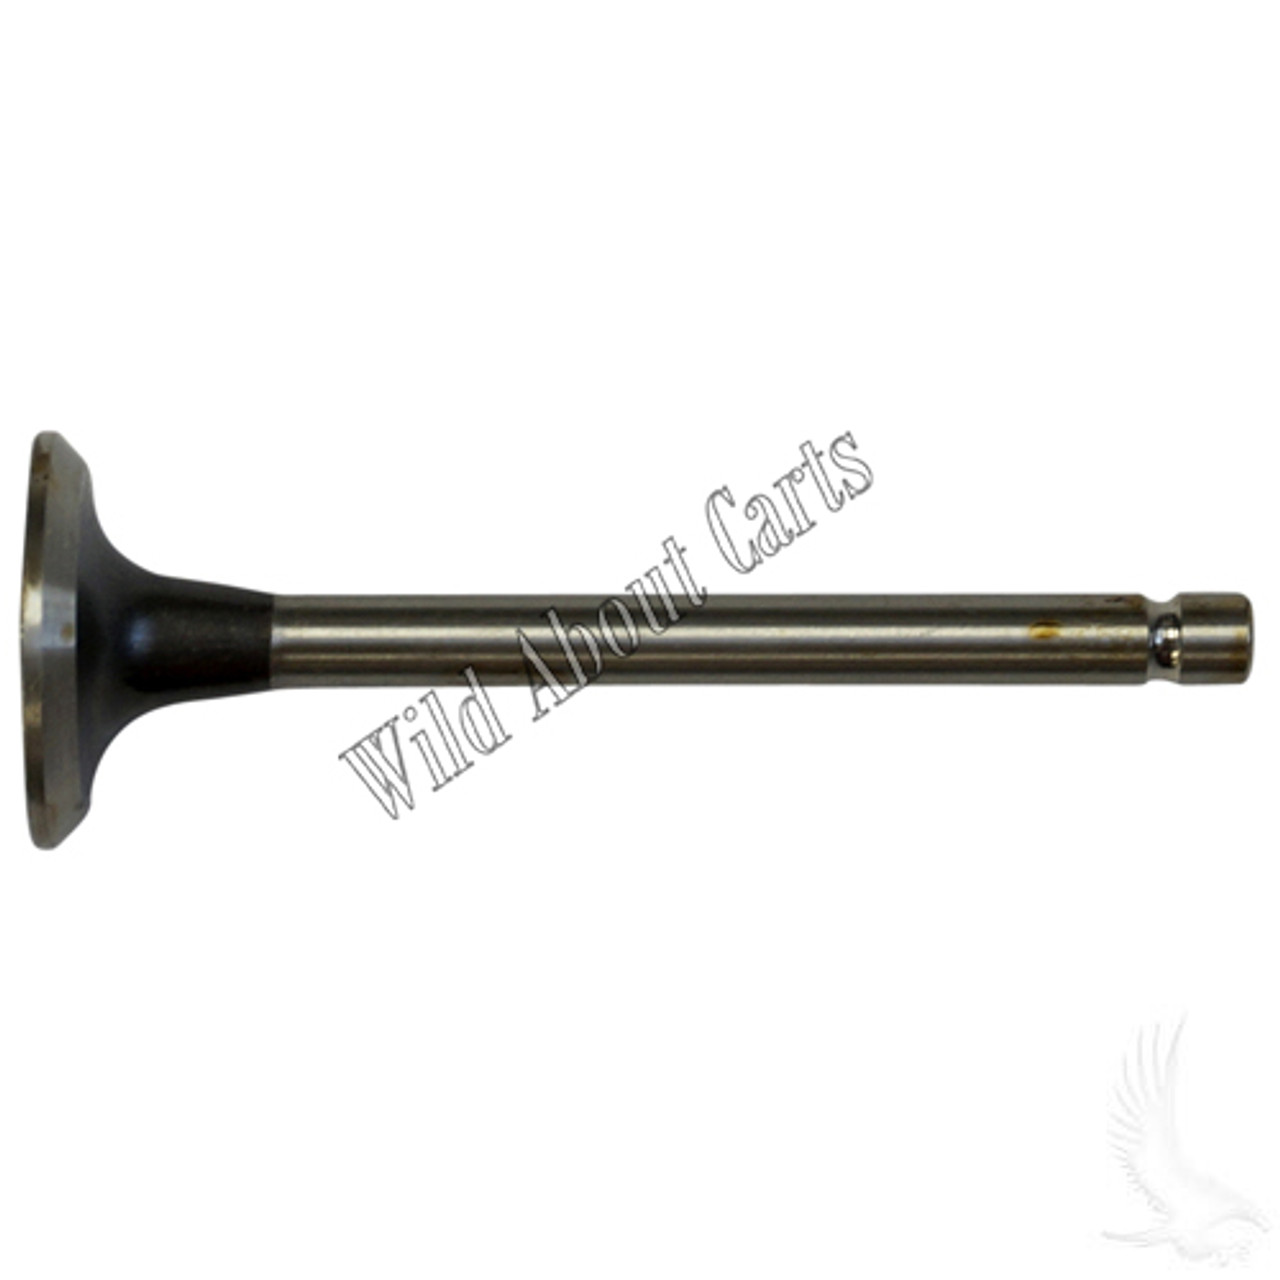 E-Z-GO Exhaust Valve (Years MCI Engine), 6795, ENG-229, 72857-G01